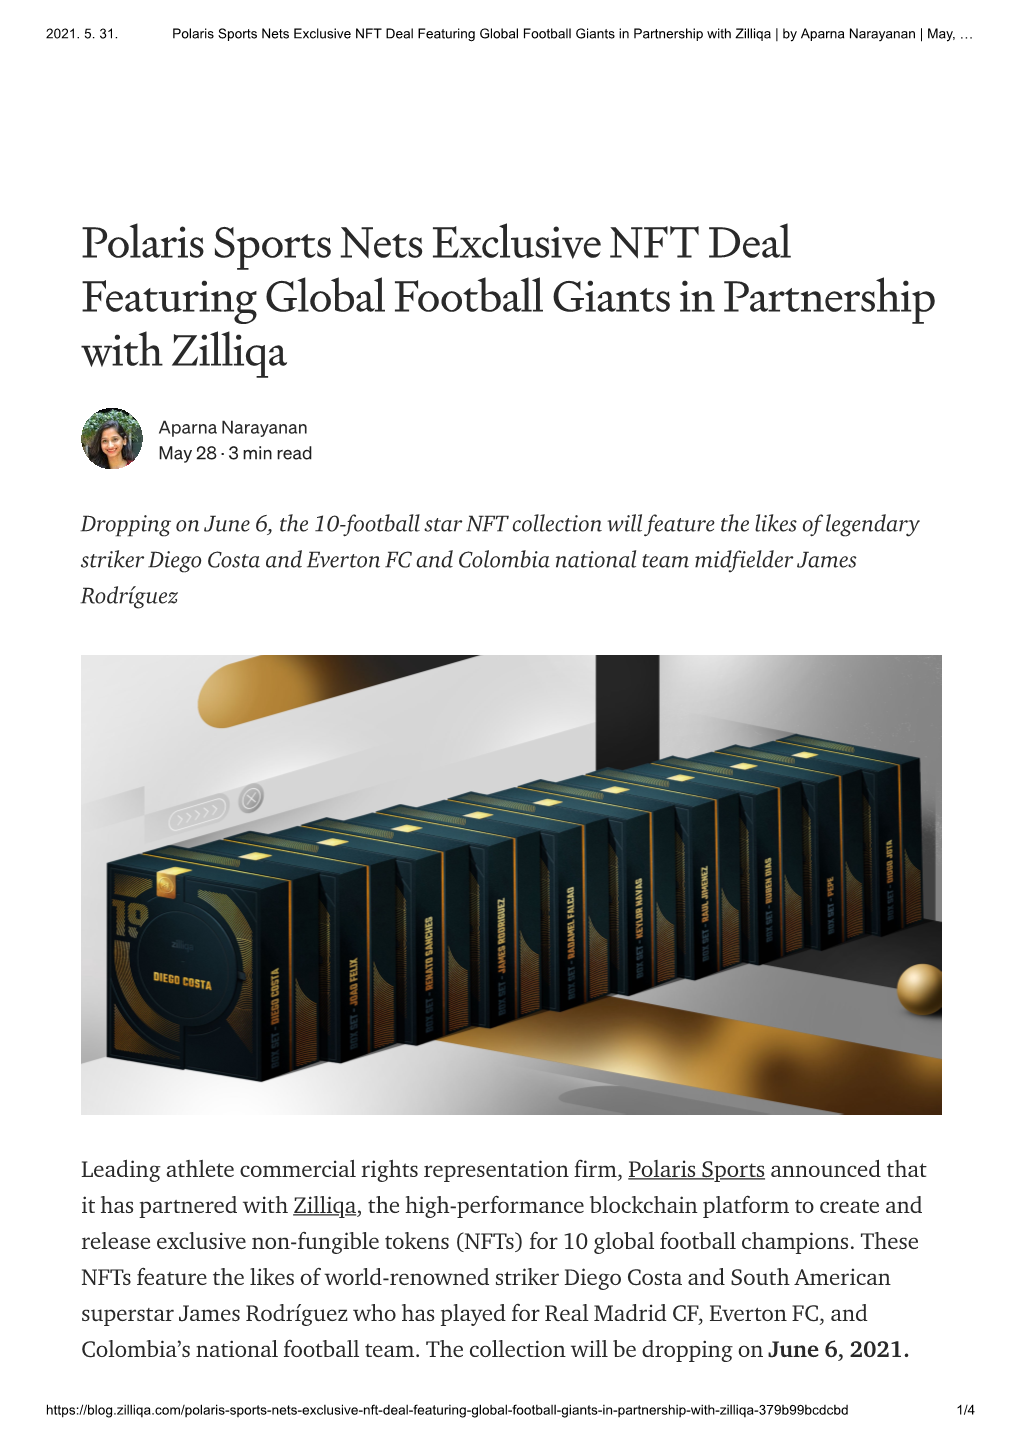 Polaris Sports Nets Exclusive NFT Deal Featuring Global Football Giants in Partnership with Zilliqa | by Aparna Narayanan | May, …